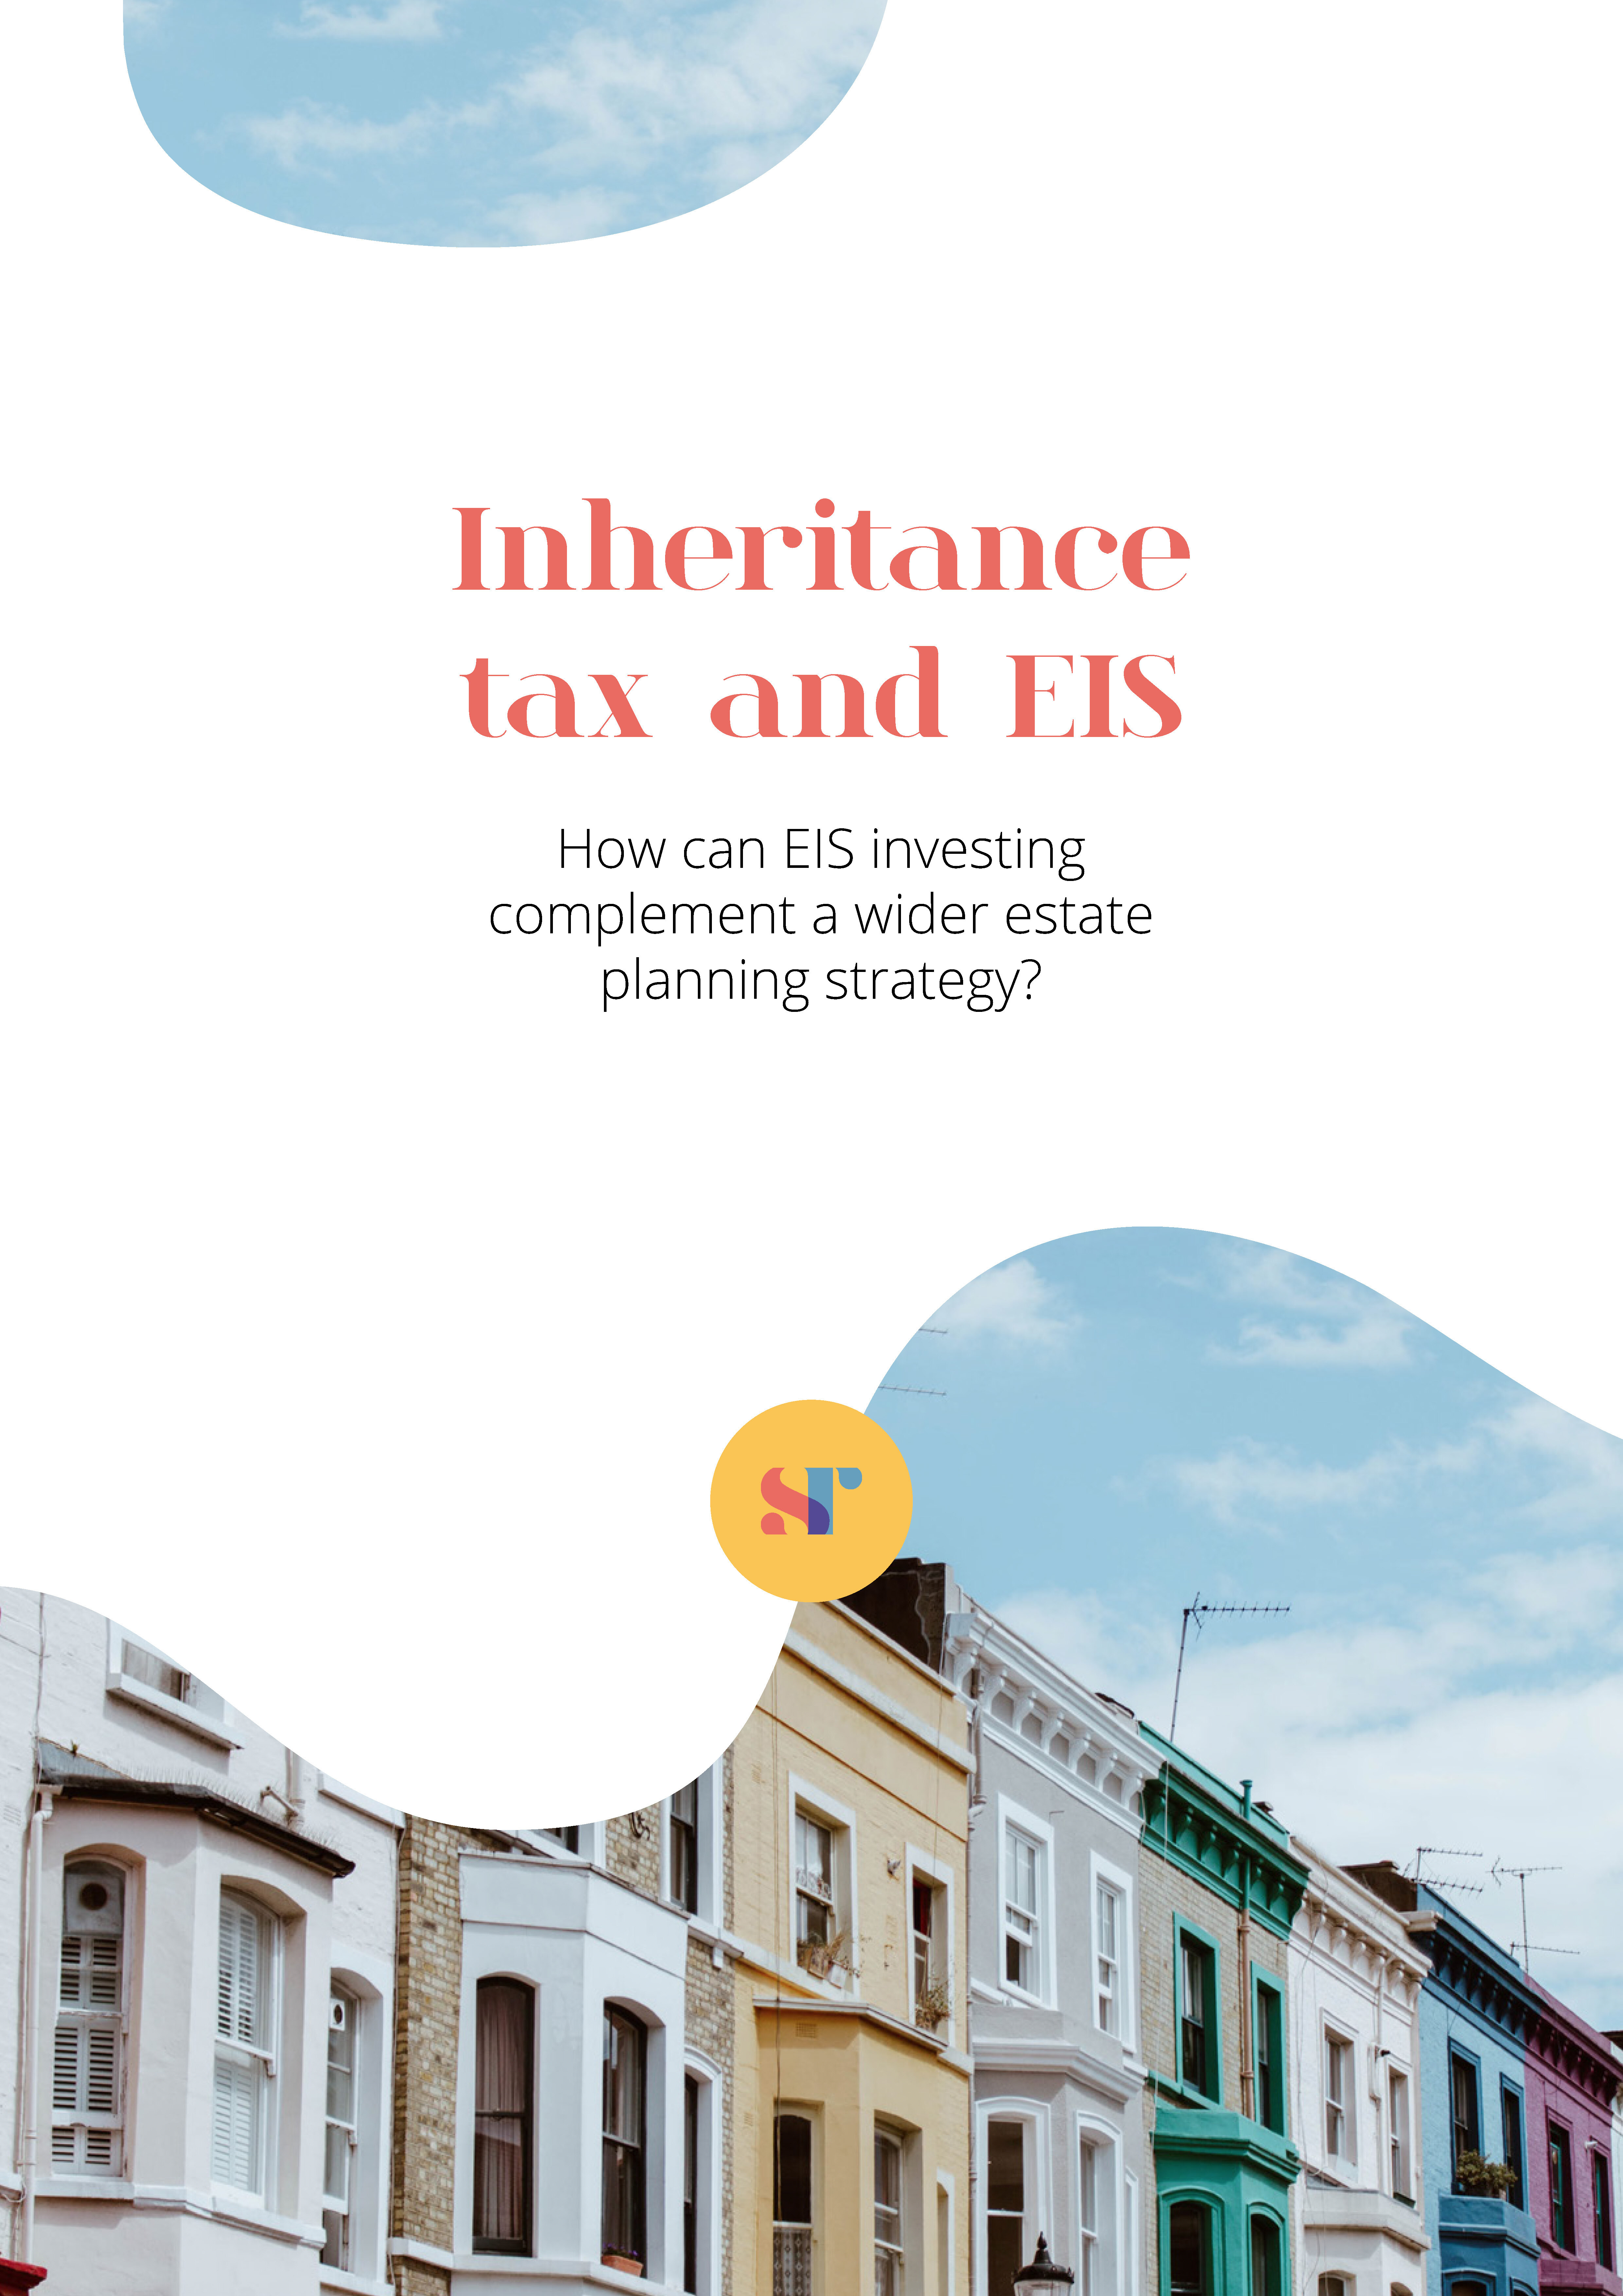 iht and eis guide